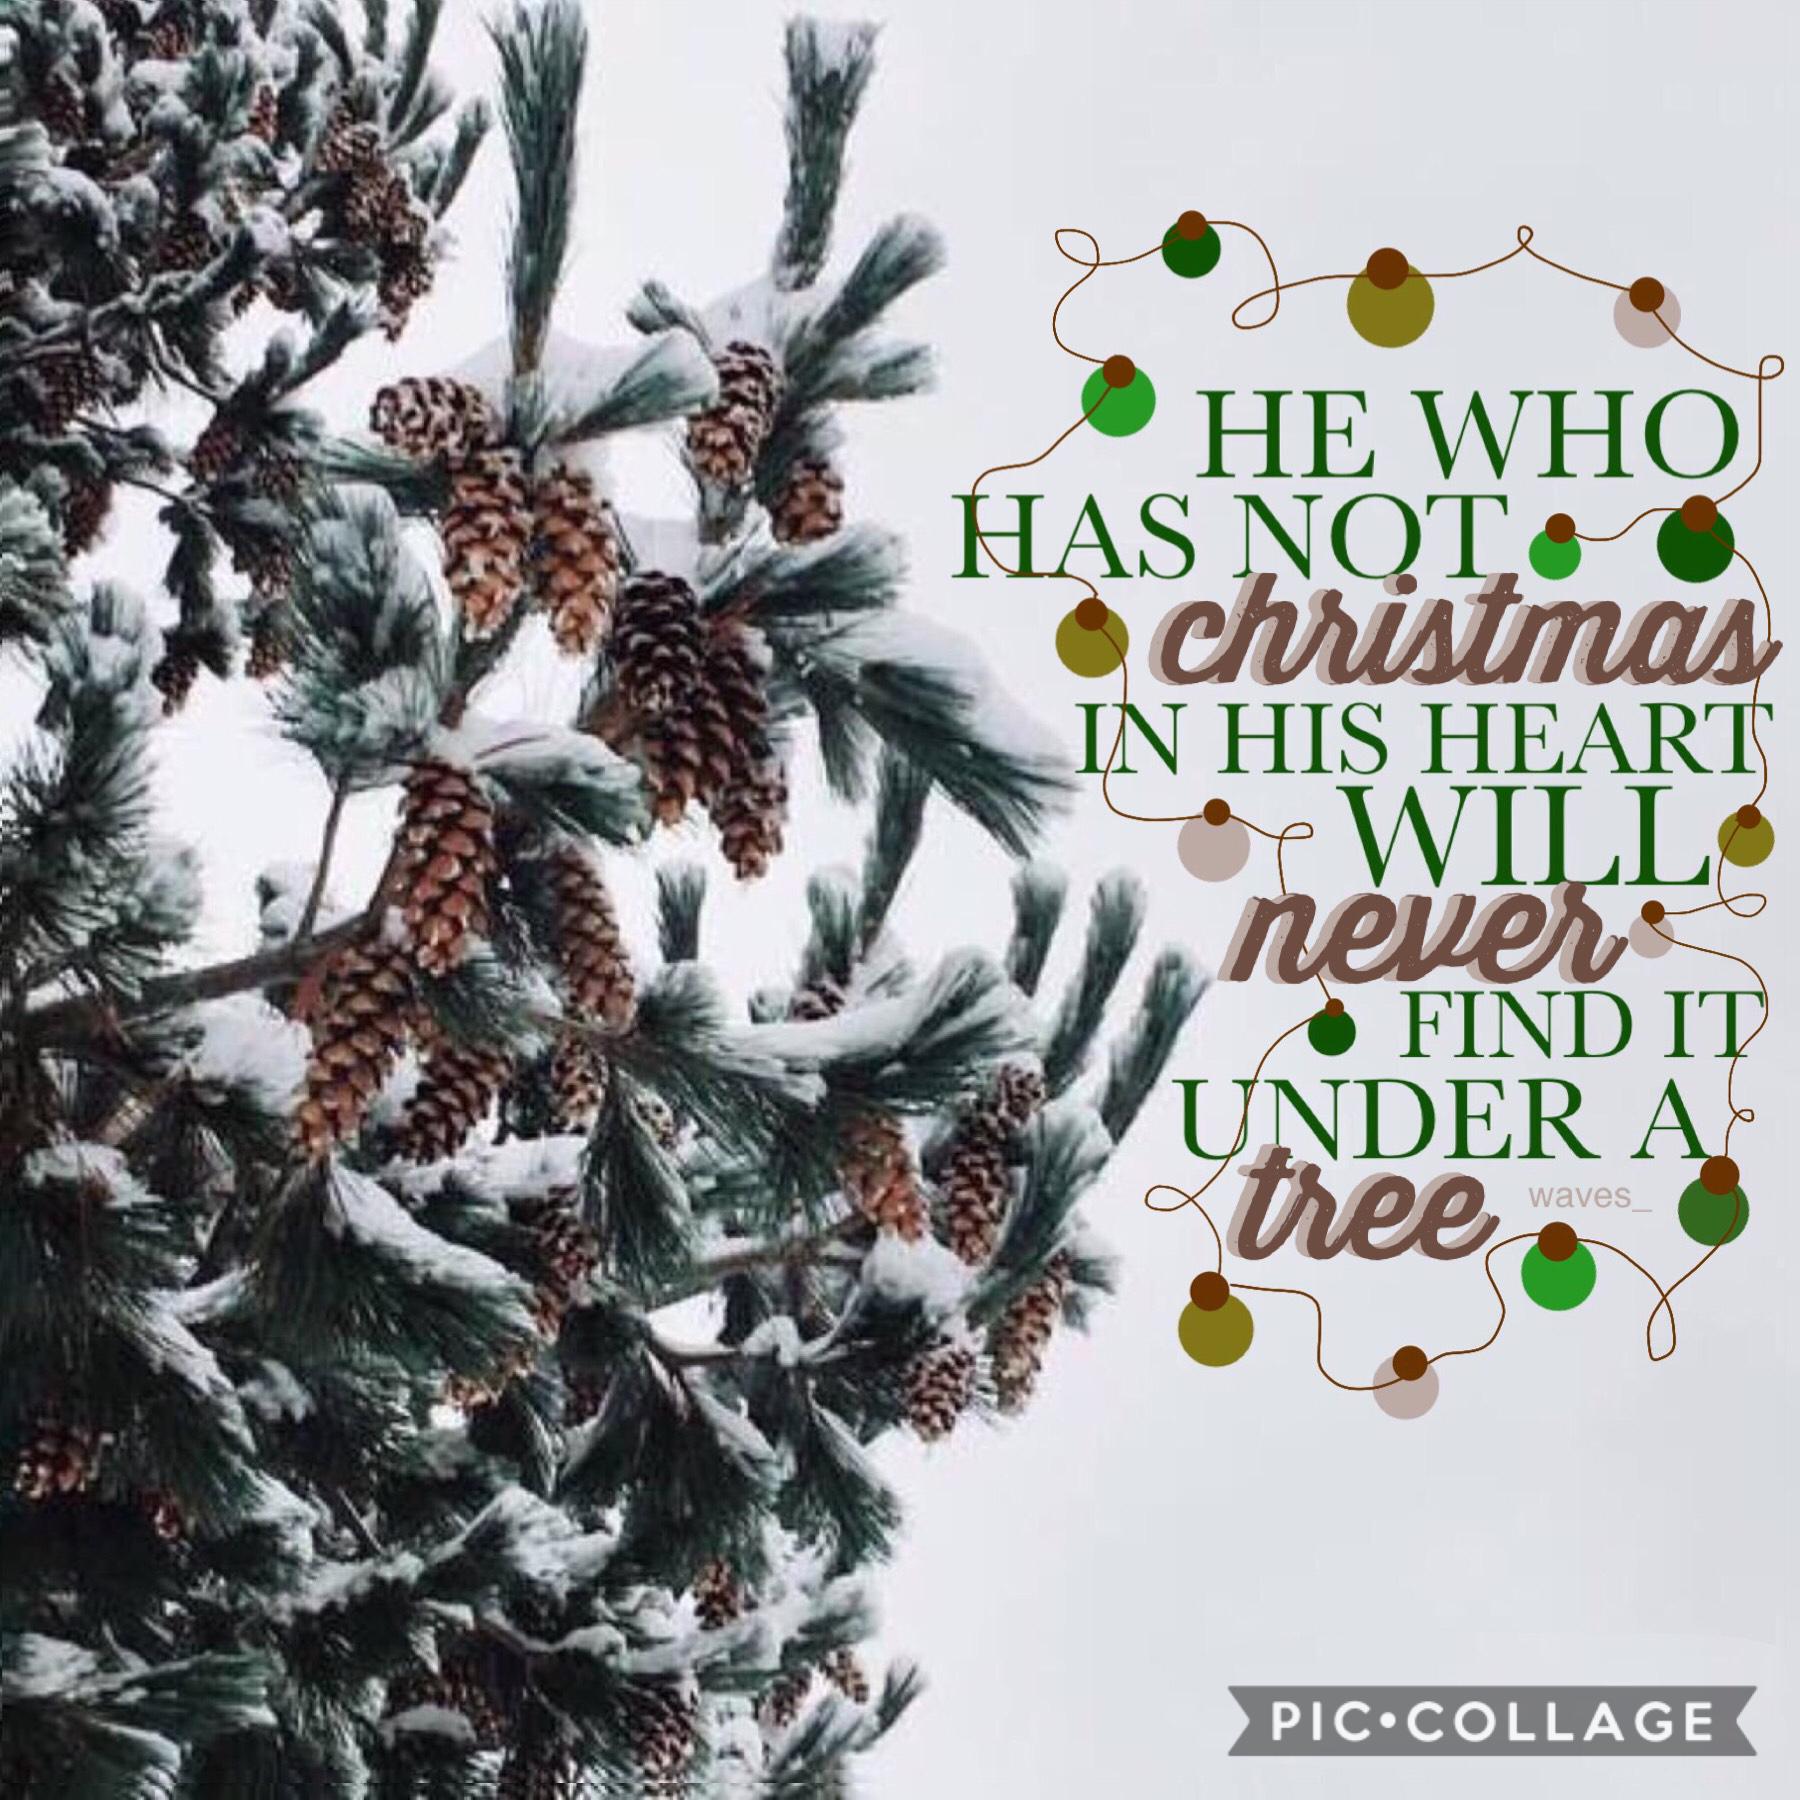 merry christmas!! 🎄 i hope you’re having a wonderful day! qotd: do you have a white christmas? aotd: nope. my family flew yesterday evening to visit family.
25•12•2018